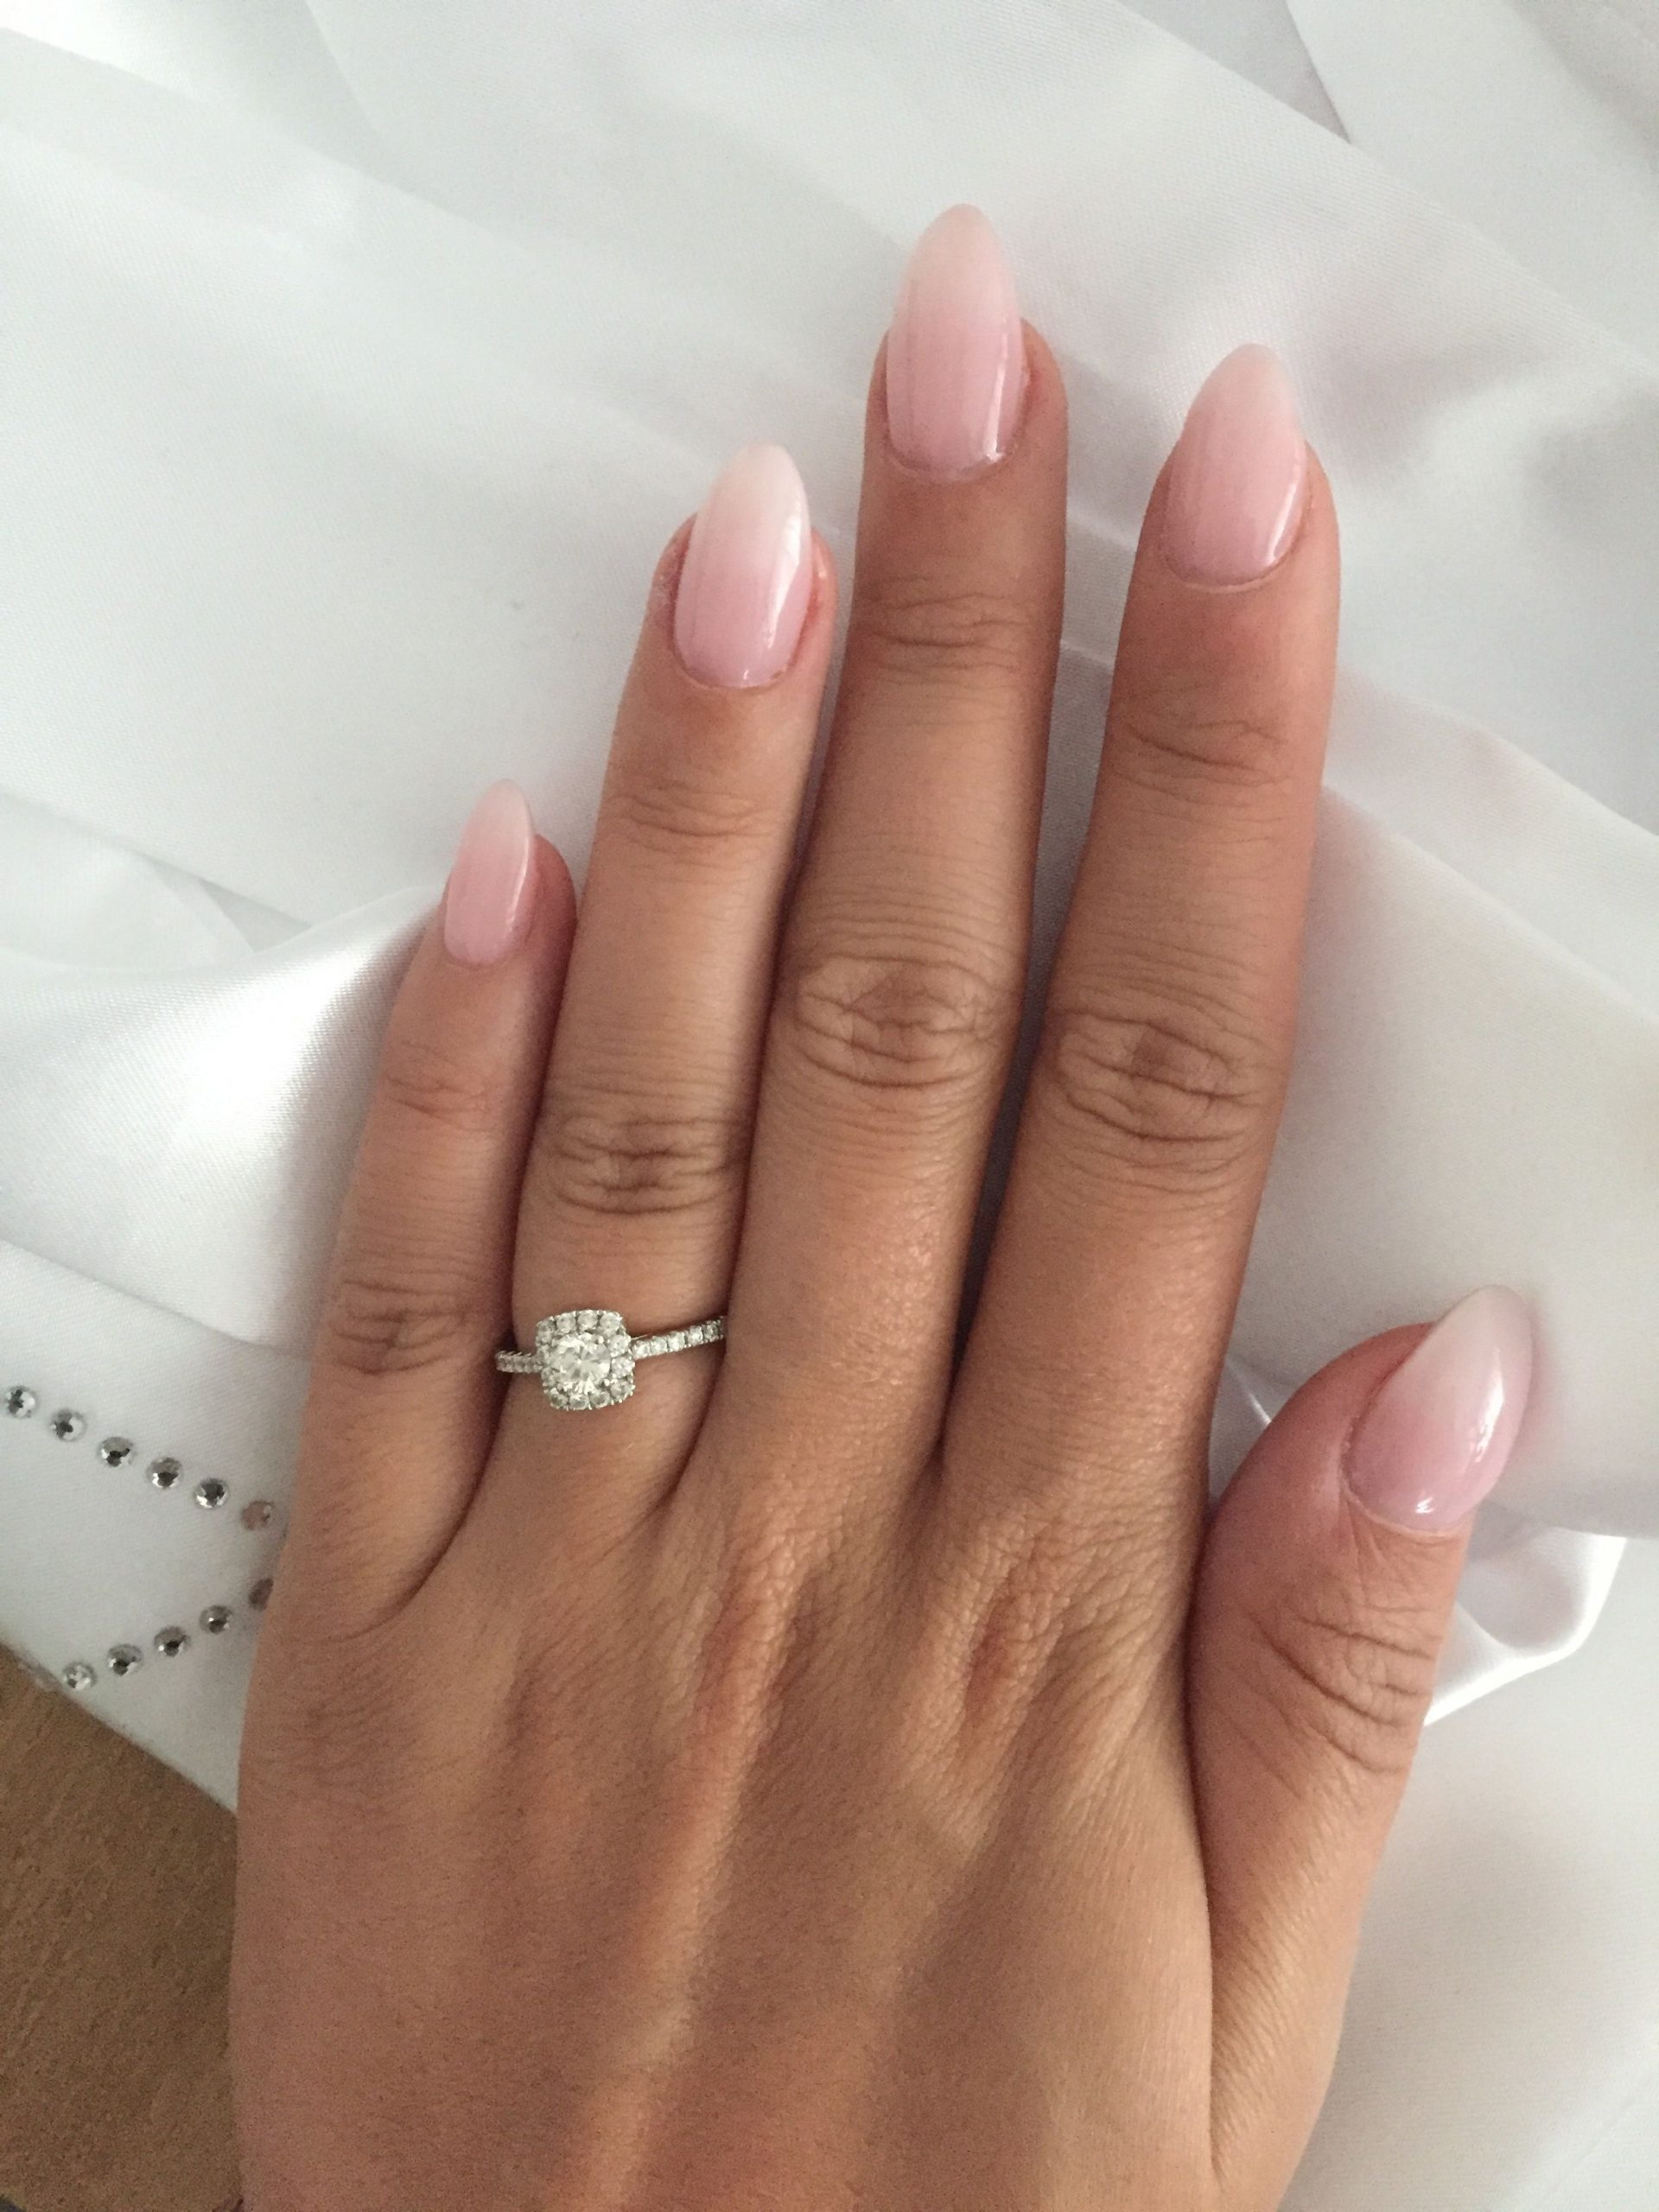 Engagement ring and wedding nails